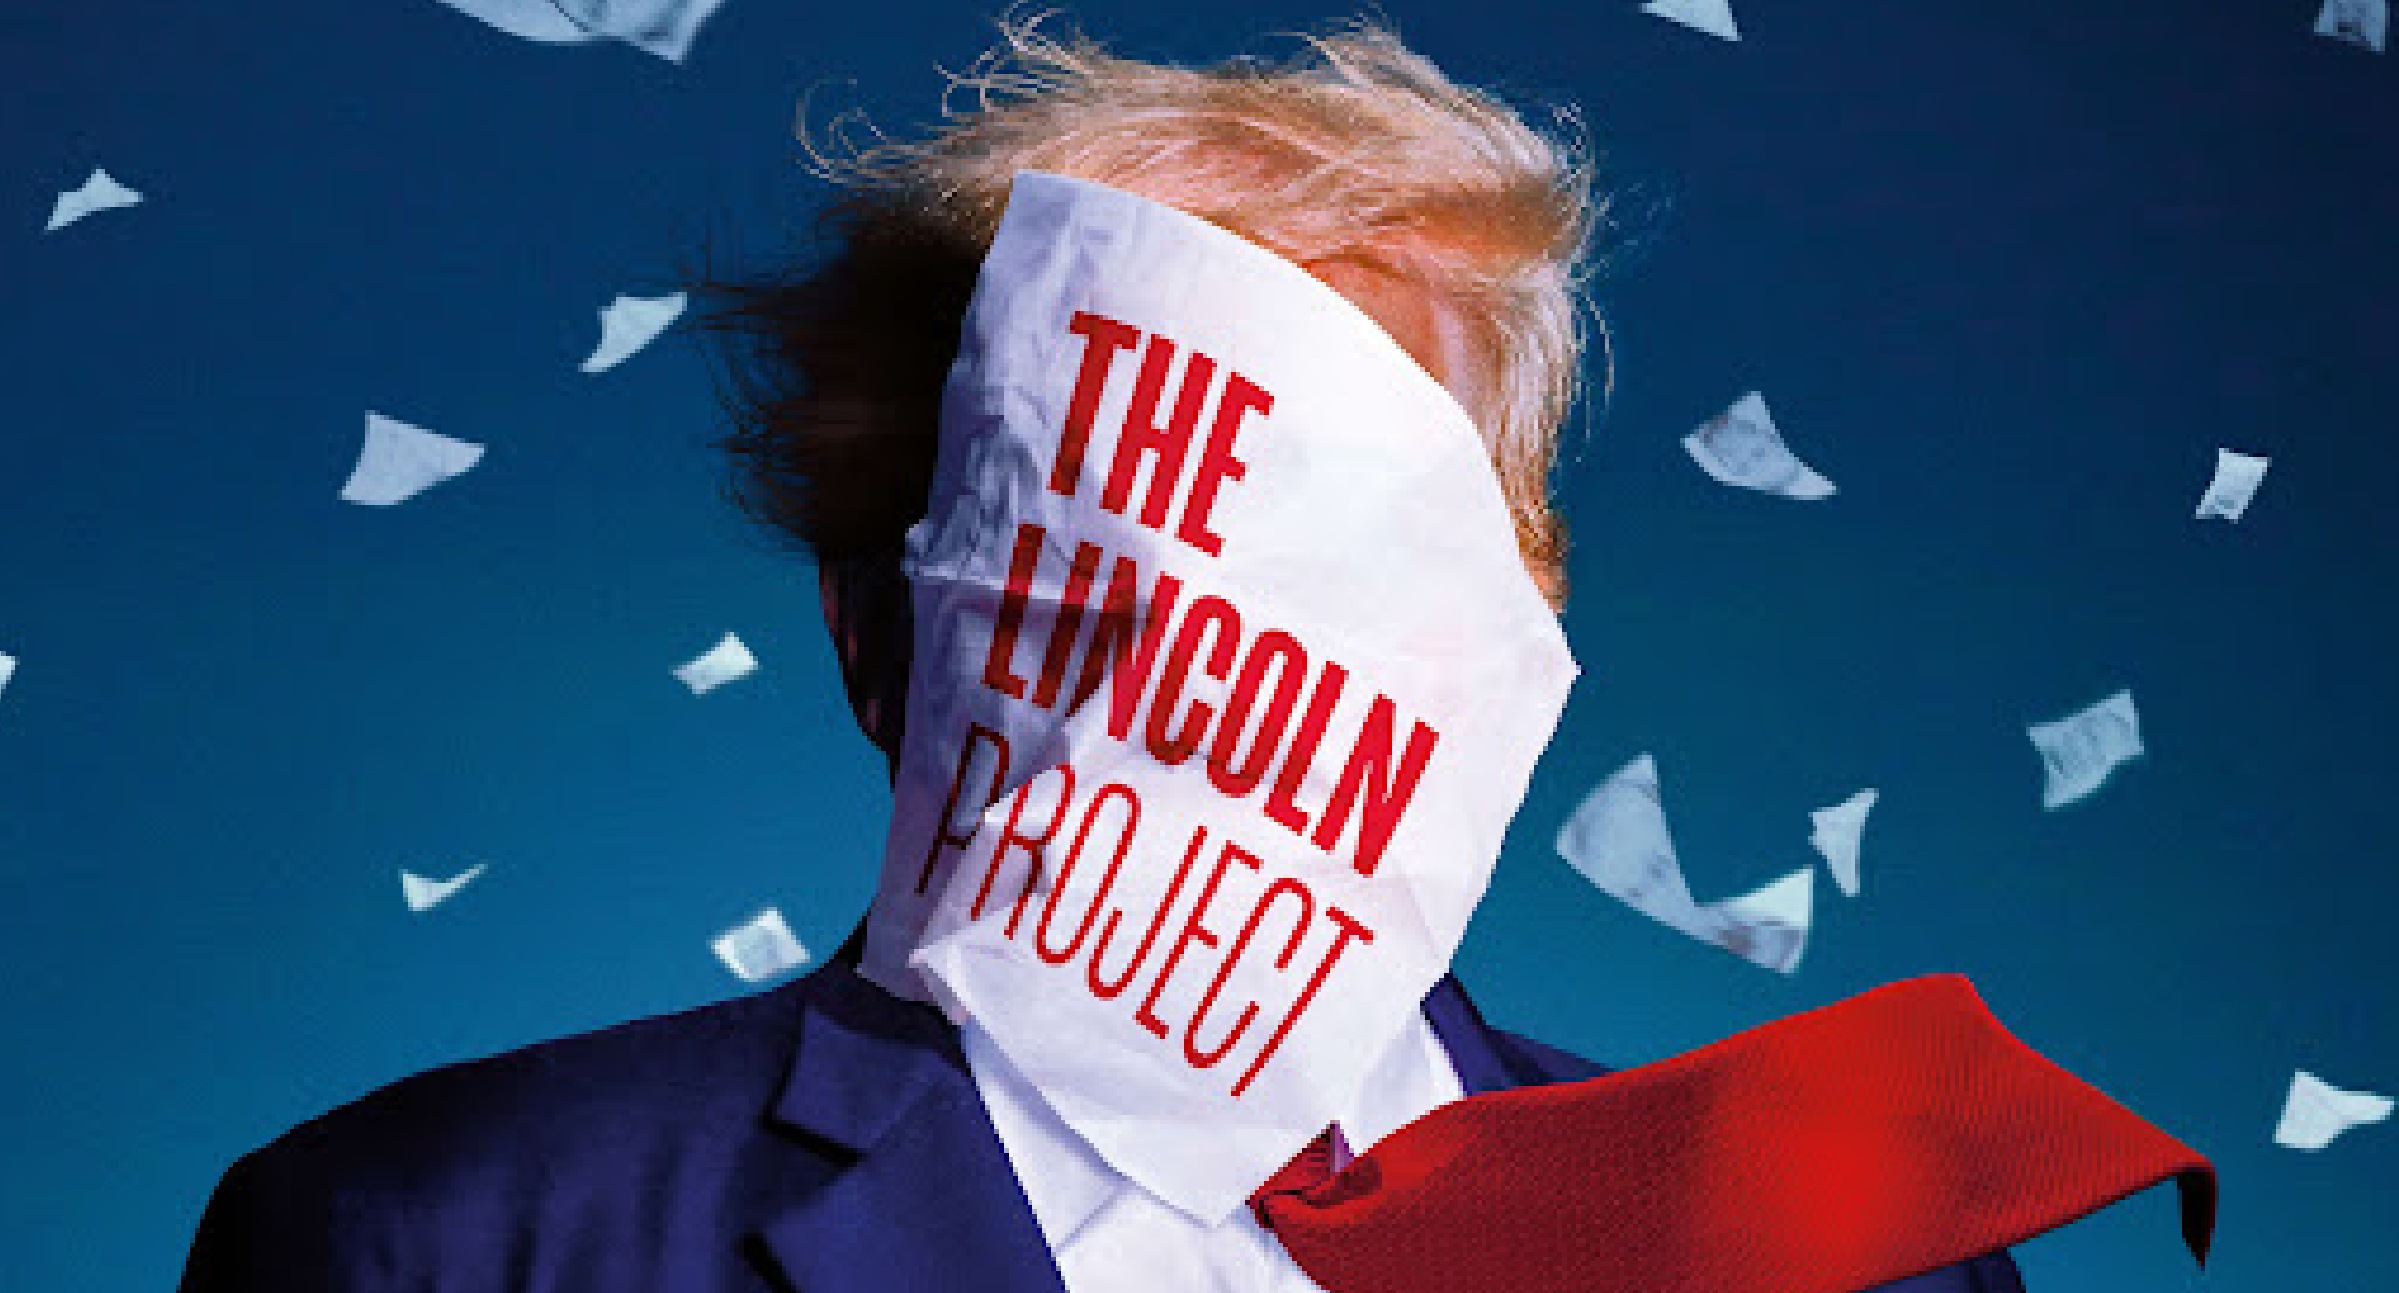 The Lincoln Project - macht & media